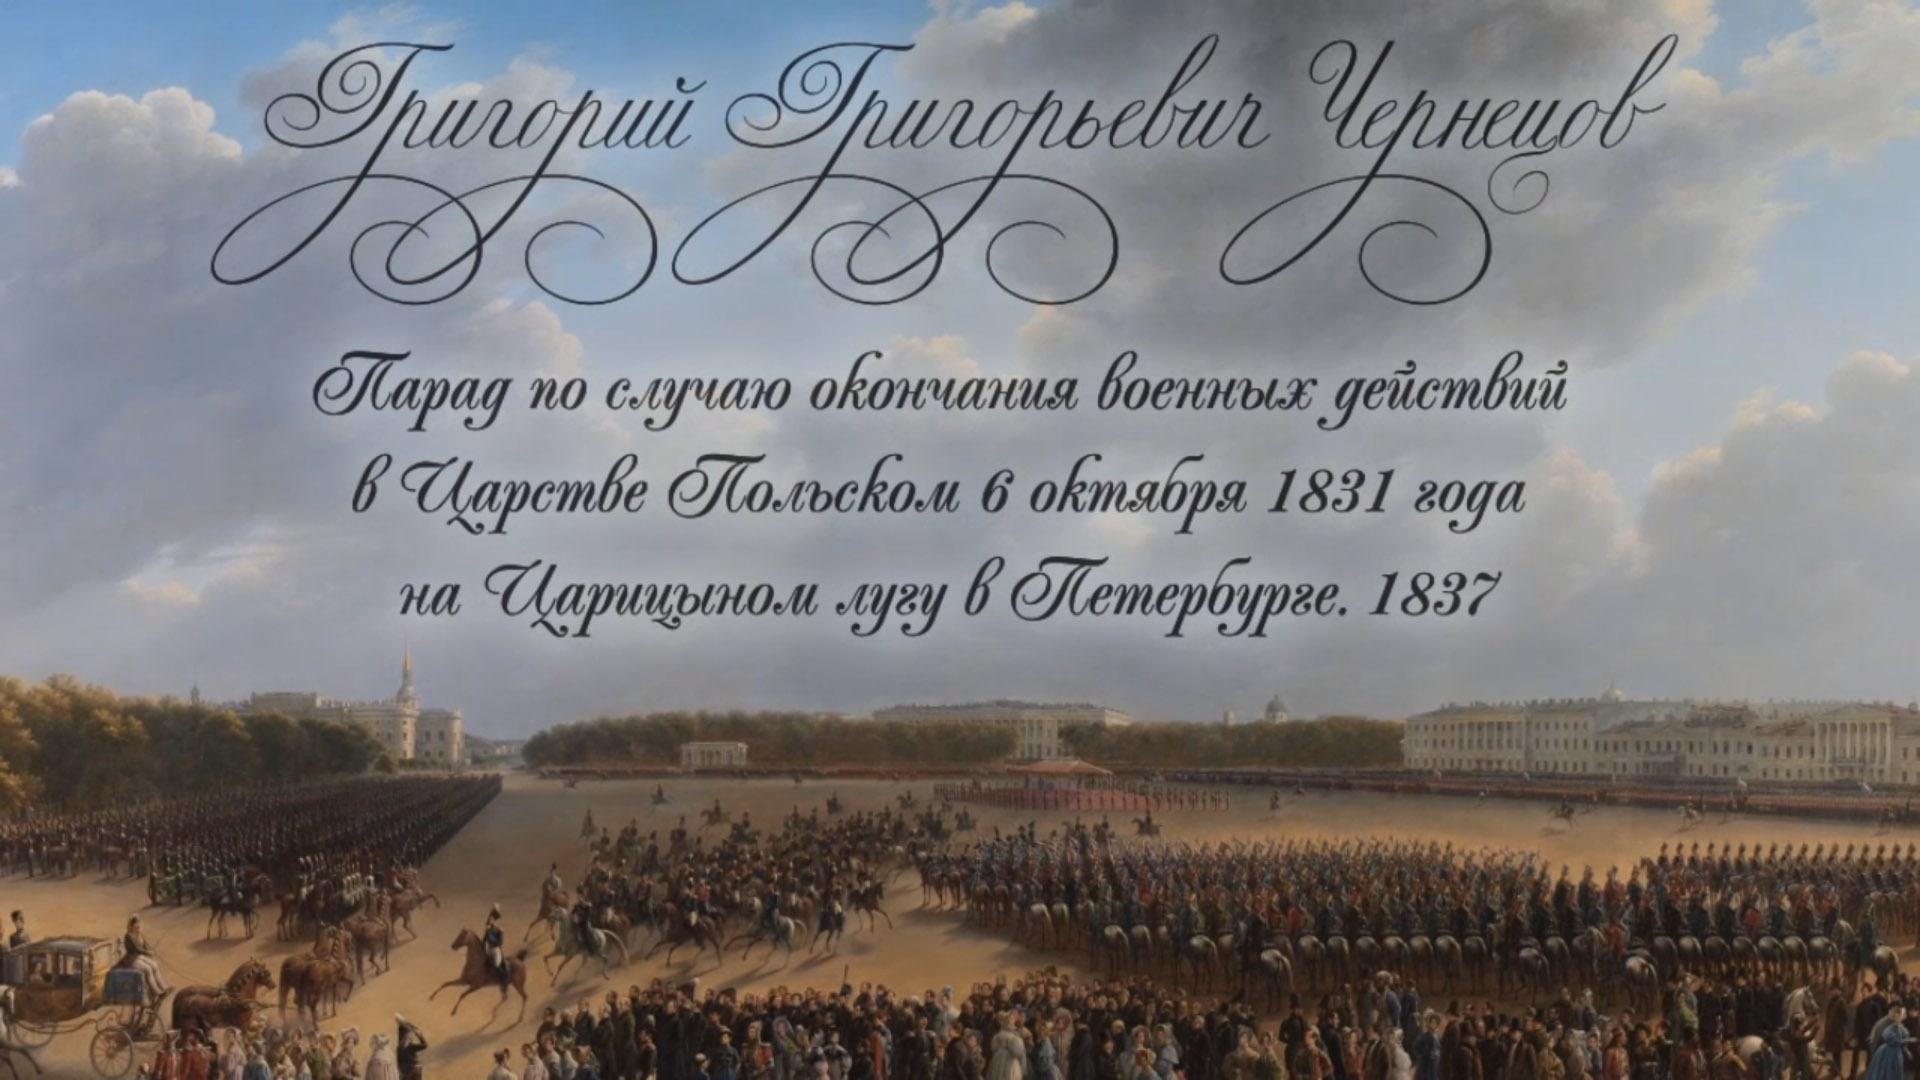 Parade Celebrating the End of Millitary Action in the Kingdom of Poland on Tsaritsa Meadow in St Petersburg on 6 October 1831